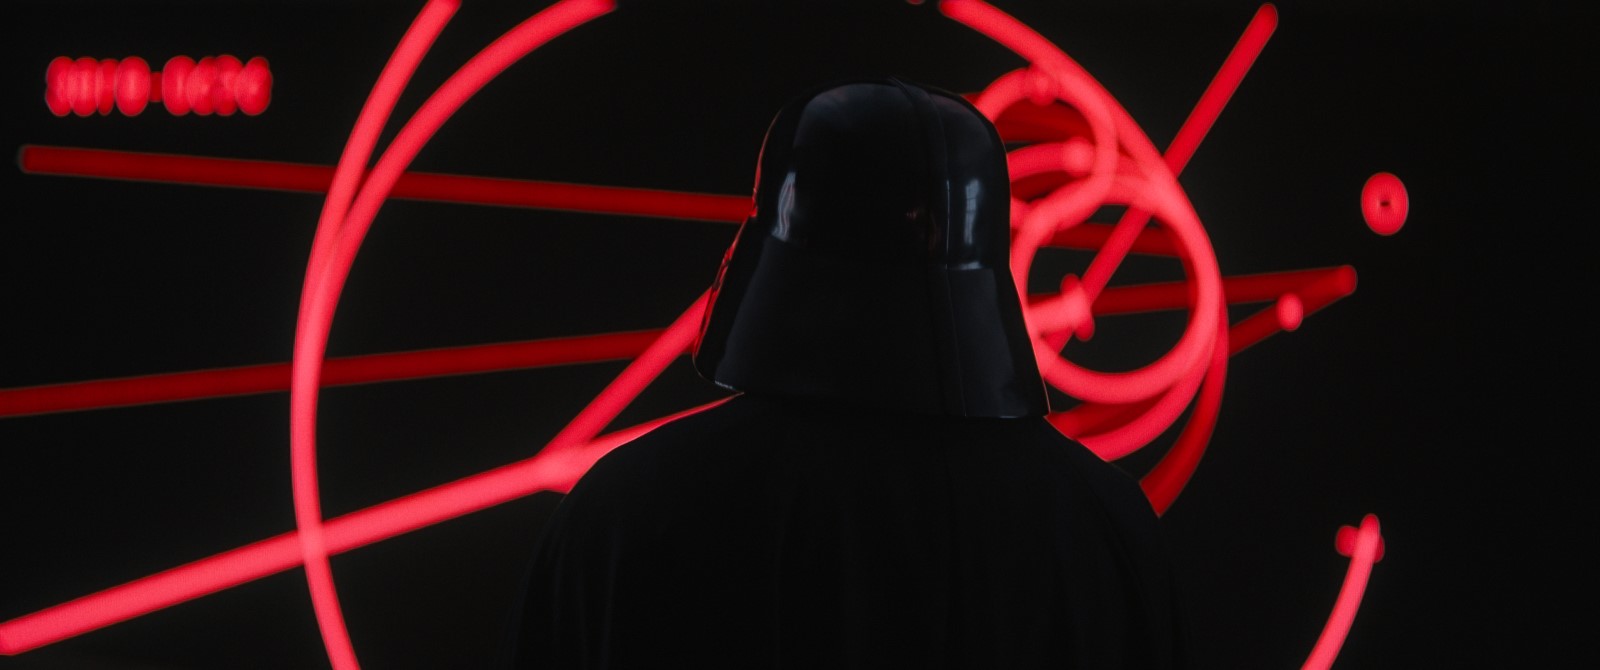 Rogue One: A Star Wars Story..Darth Vader (voiced by James Earl Jones)..Ph: Film Frame ILM/Lucasfilm..©2016 Lucasfilm Ltd. All Rights Reserved.